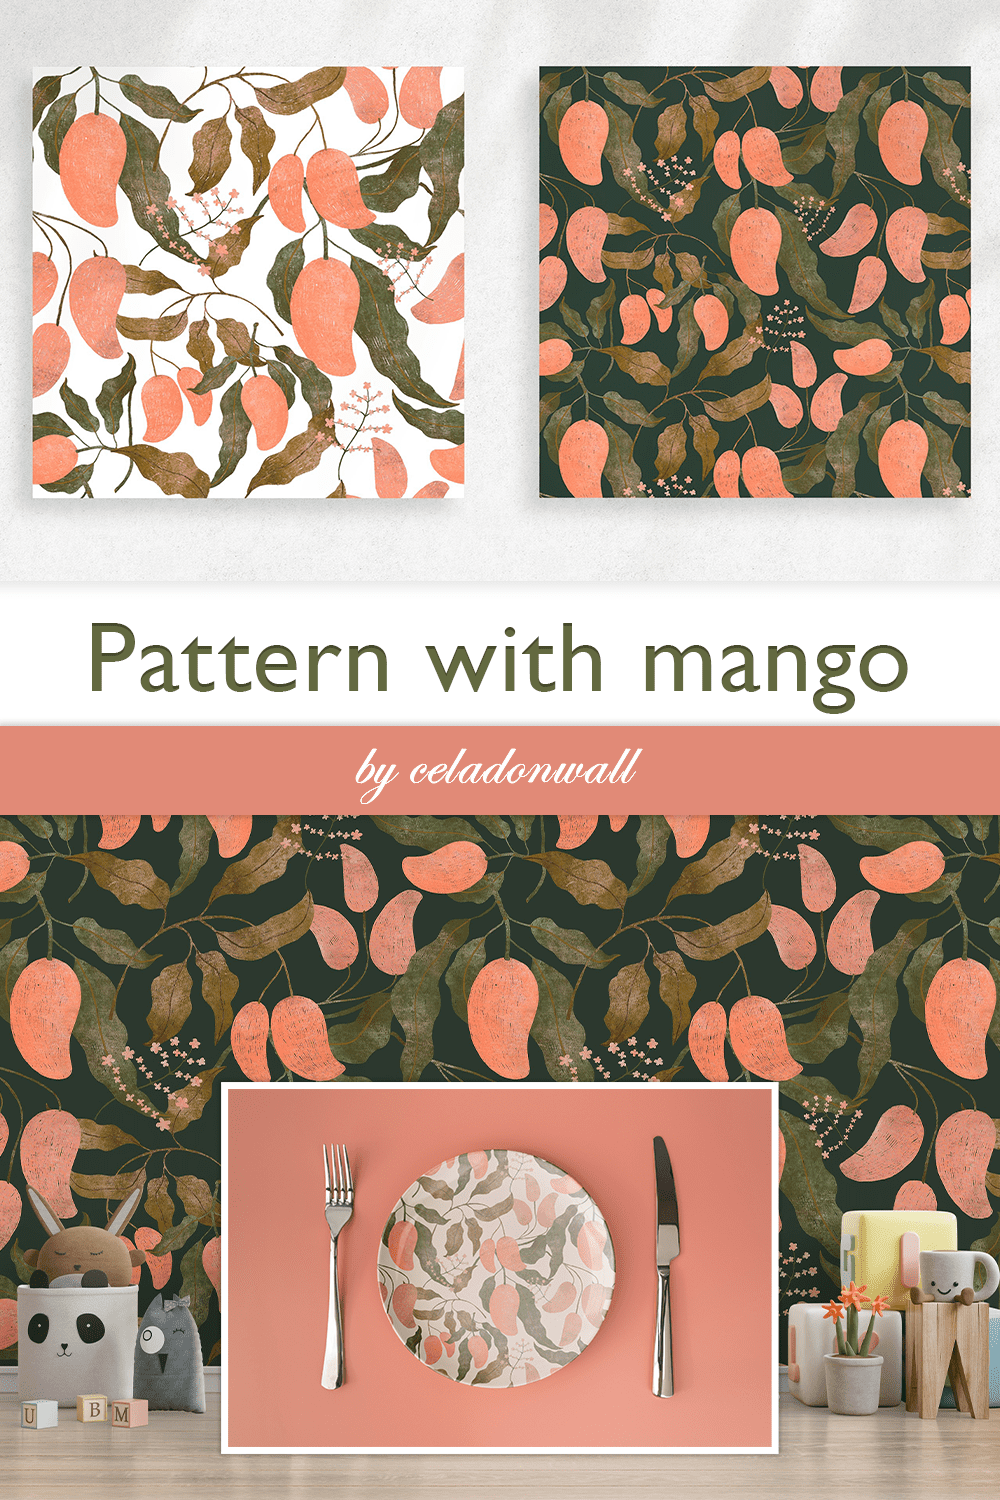 Pattern with mango - pinterest image preview.